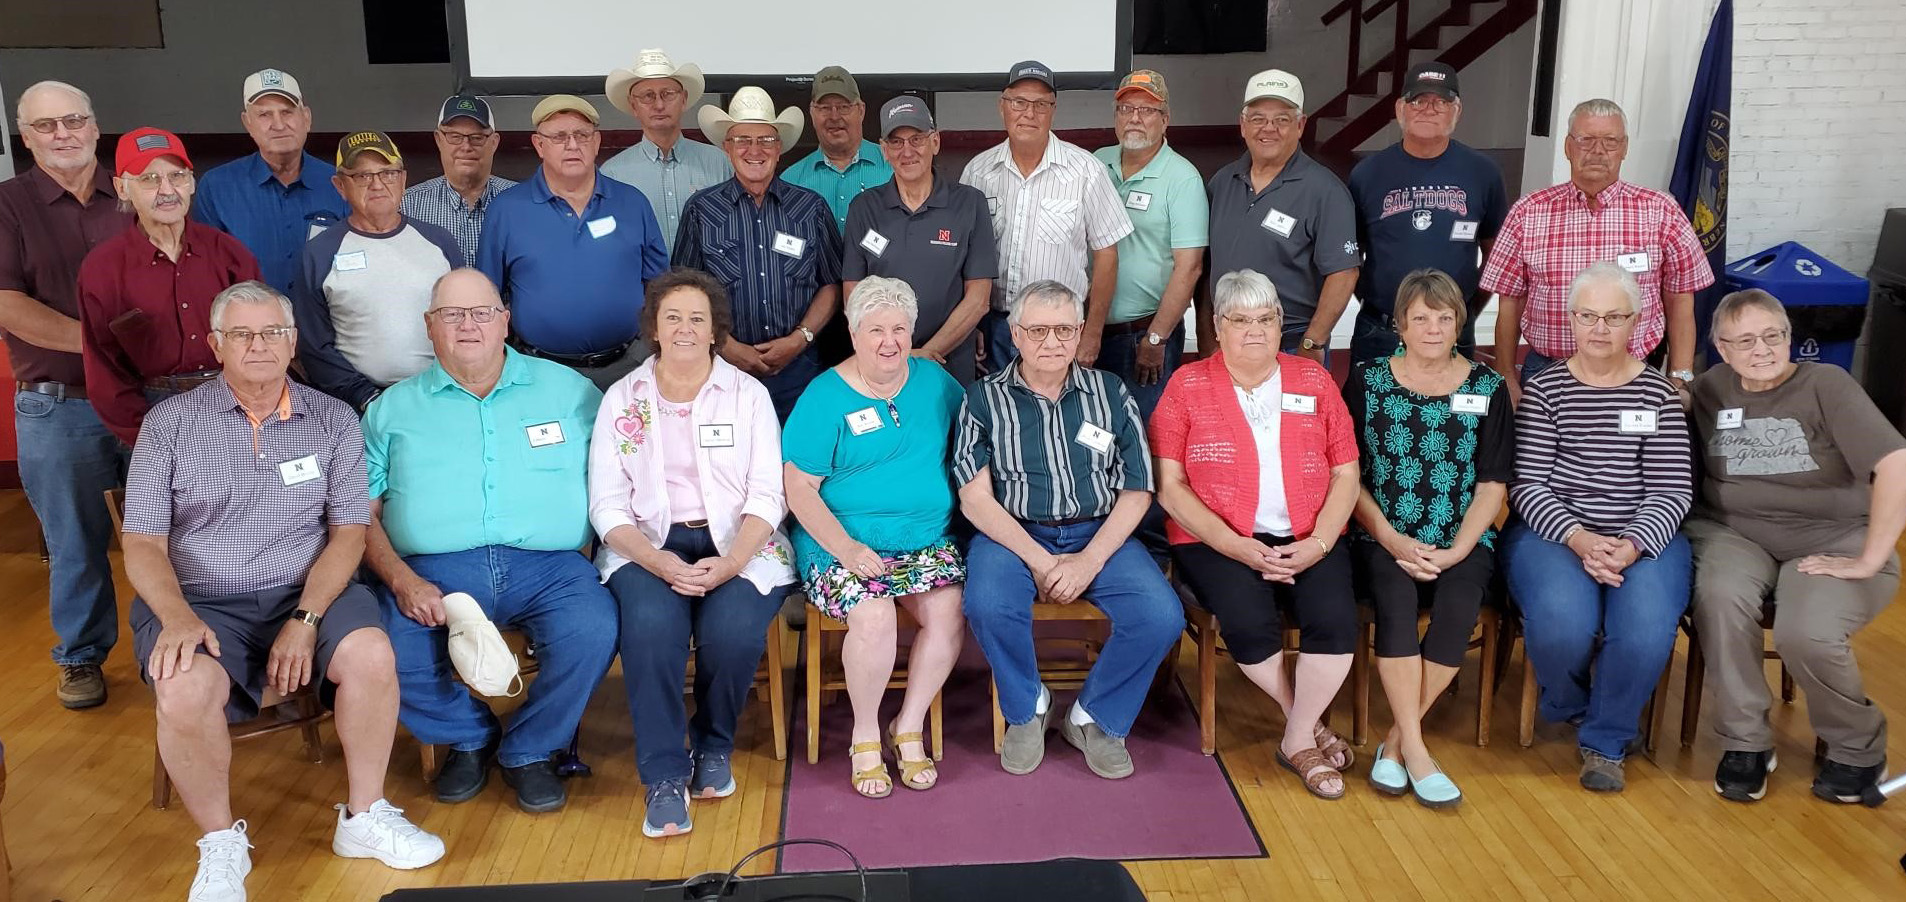 The Class of 1971 from the University of Nebraska School of Technical Agriculture gathered for an all-school reunion at Aggie Alumni Day on June 26. (NCTA Photo)